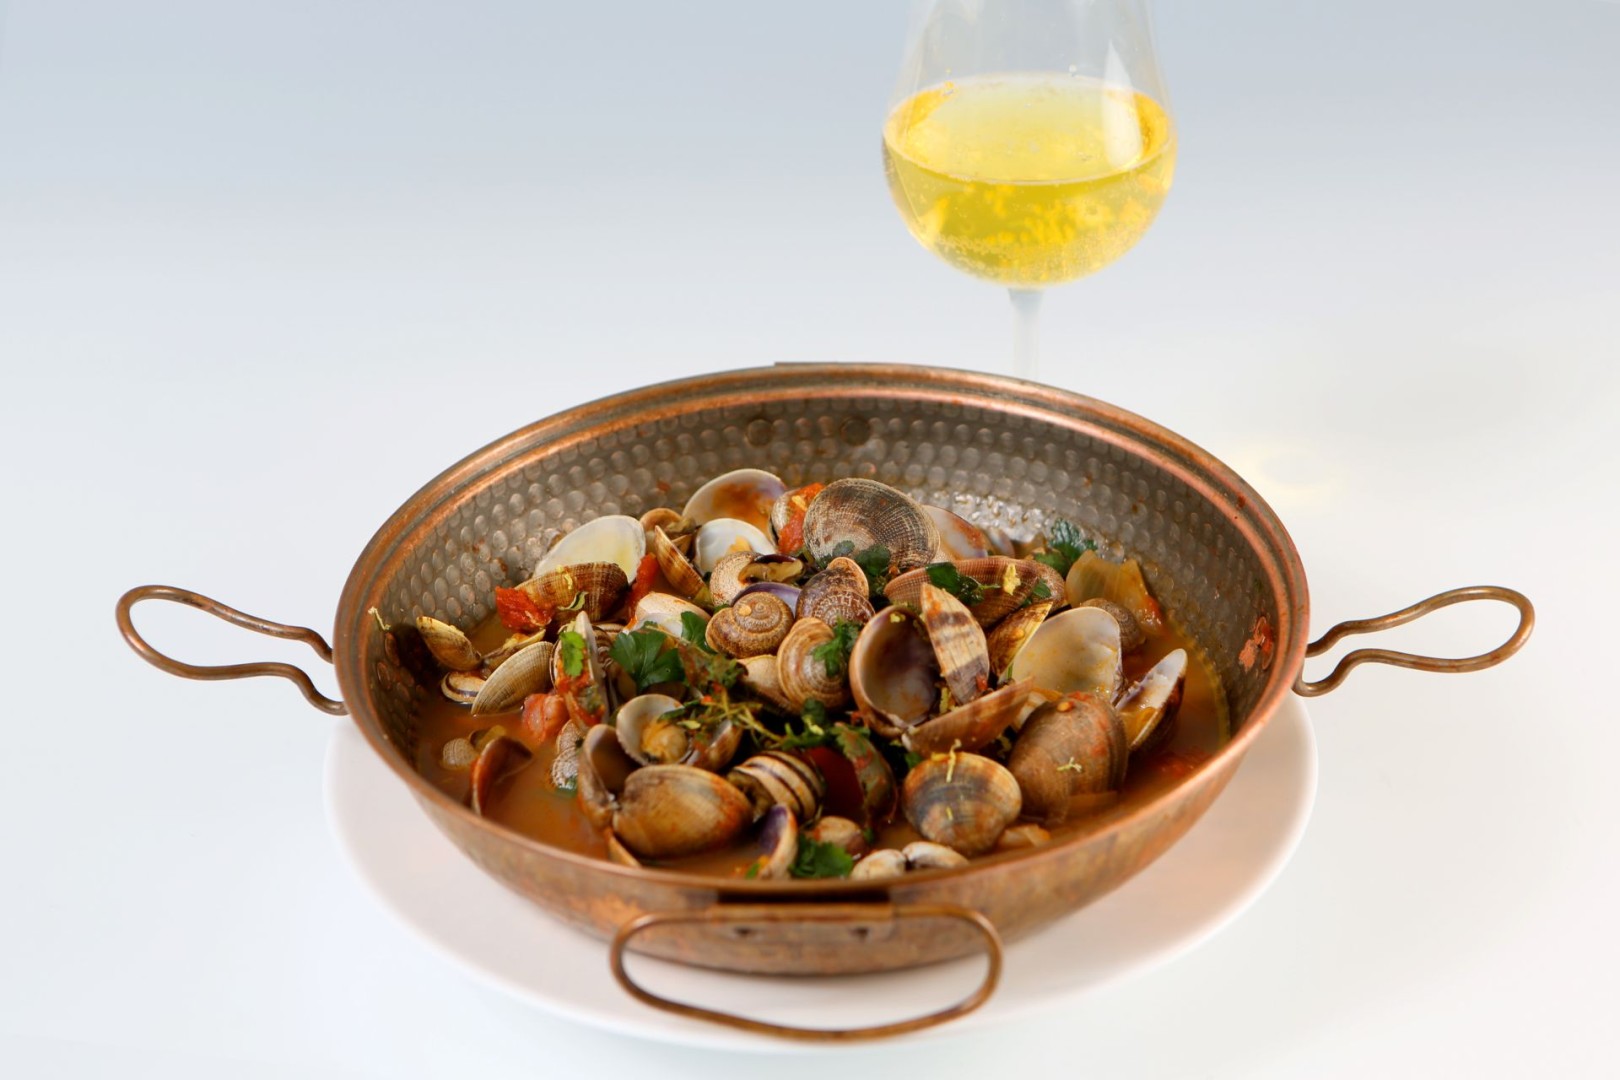 Cataplana of milk snail with clams and shrimp from the coast